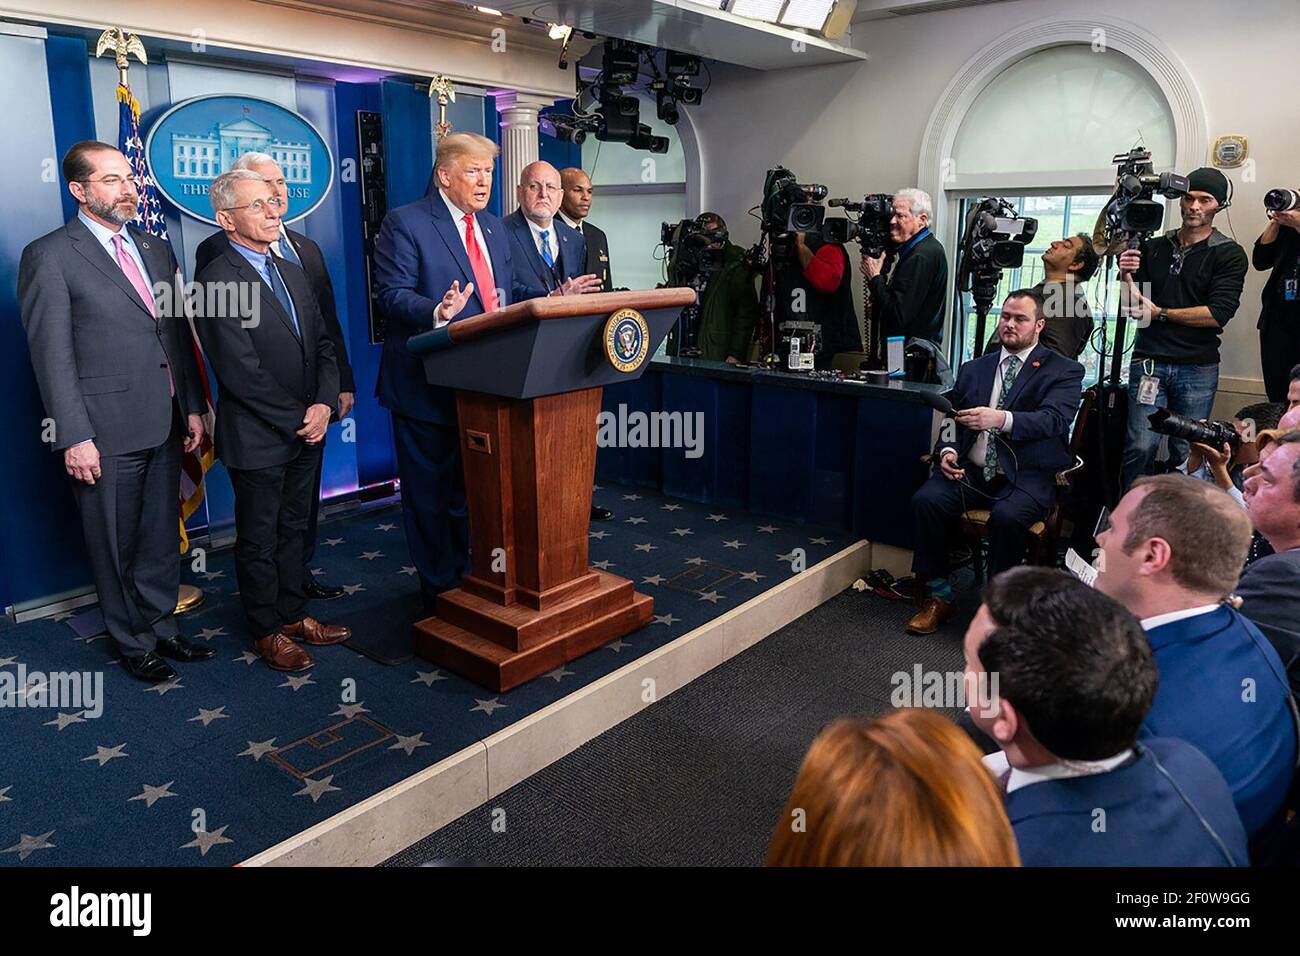 President Donald Trump joined by Vice President Mike Pence takes questions from reporters during a Coronavirus Task Force update Saturday Feb. 29 2020 in the James S. Brady Press Briefing Room of the White House. Stock Photo